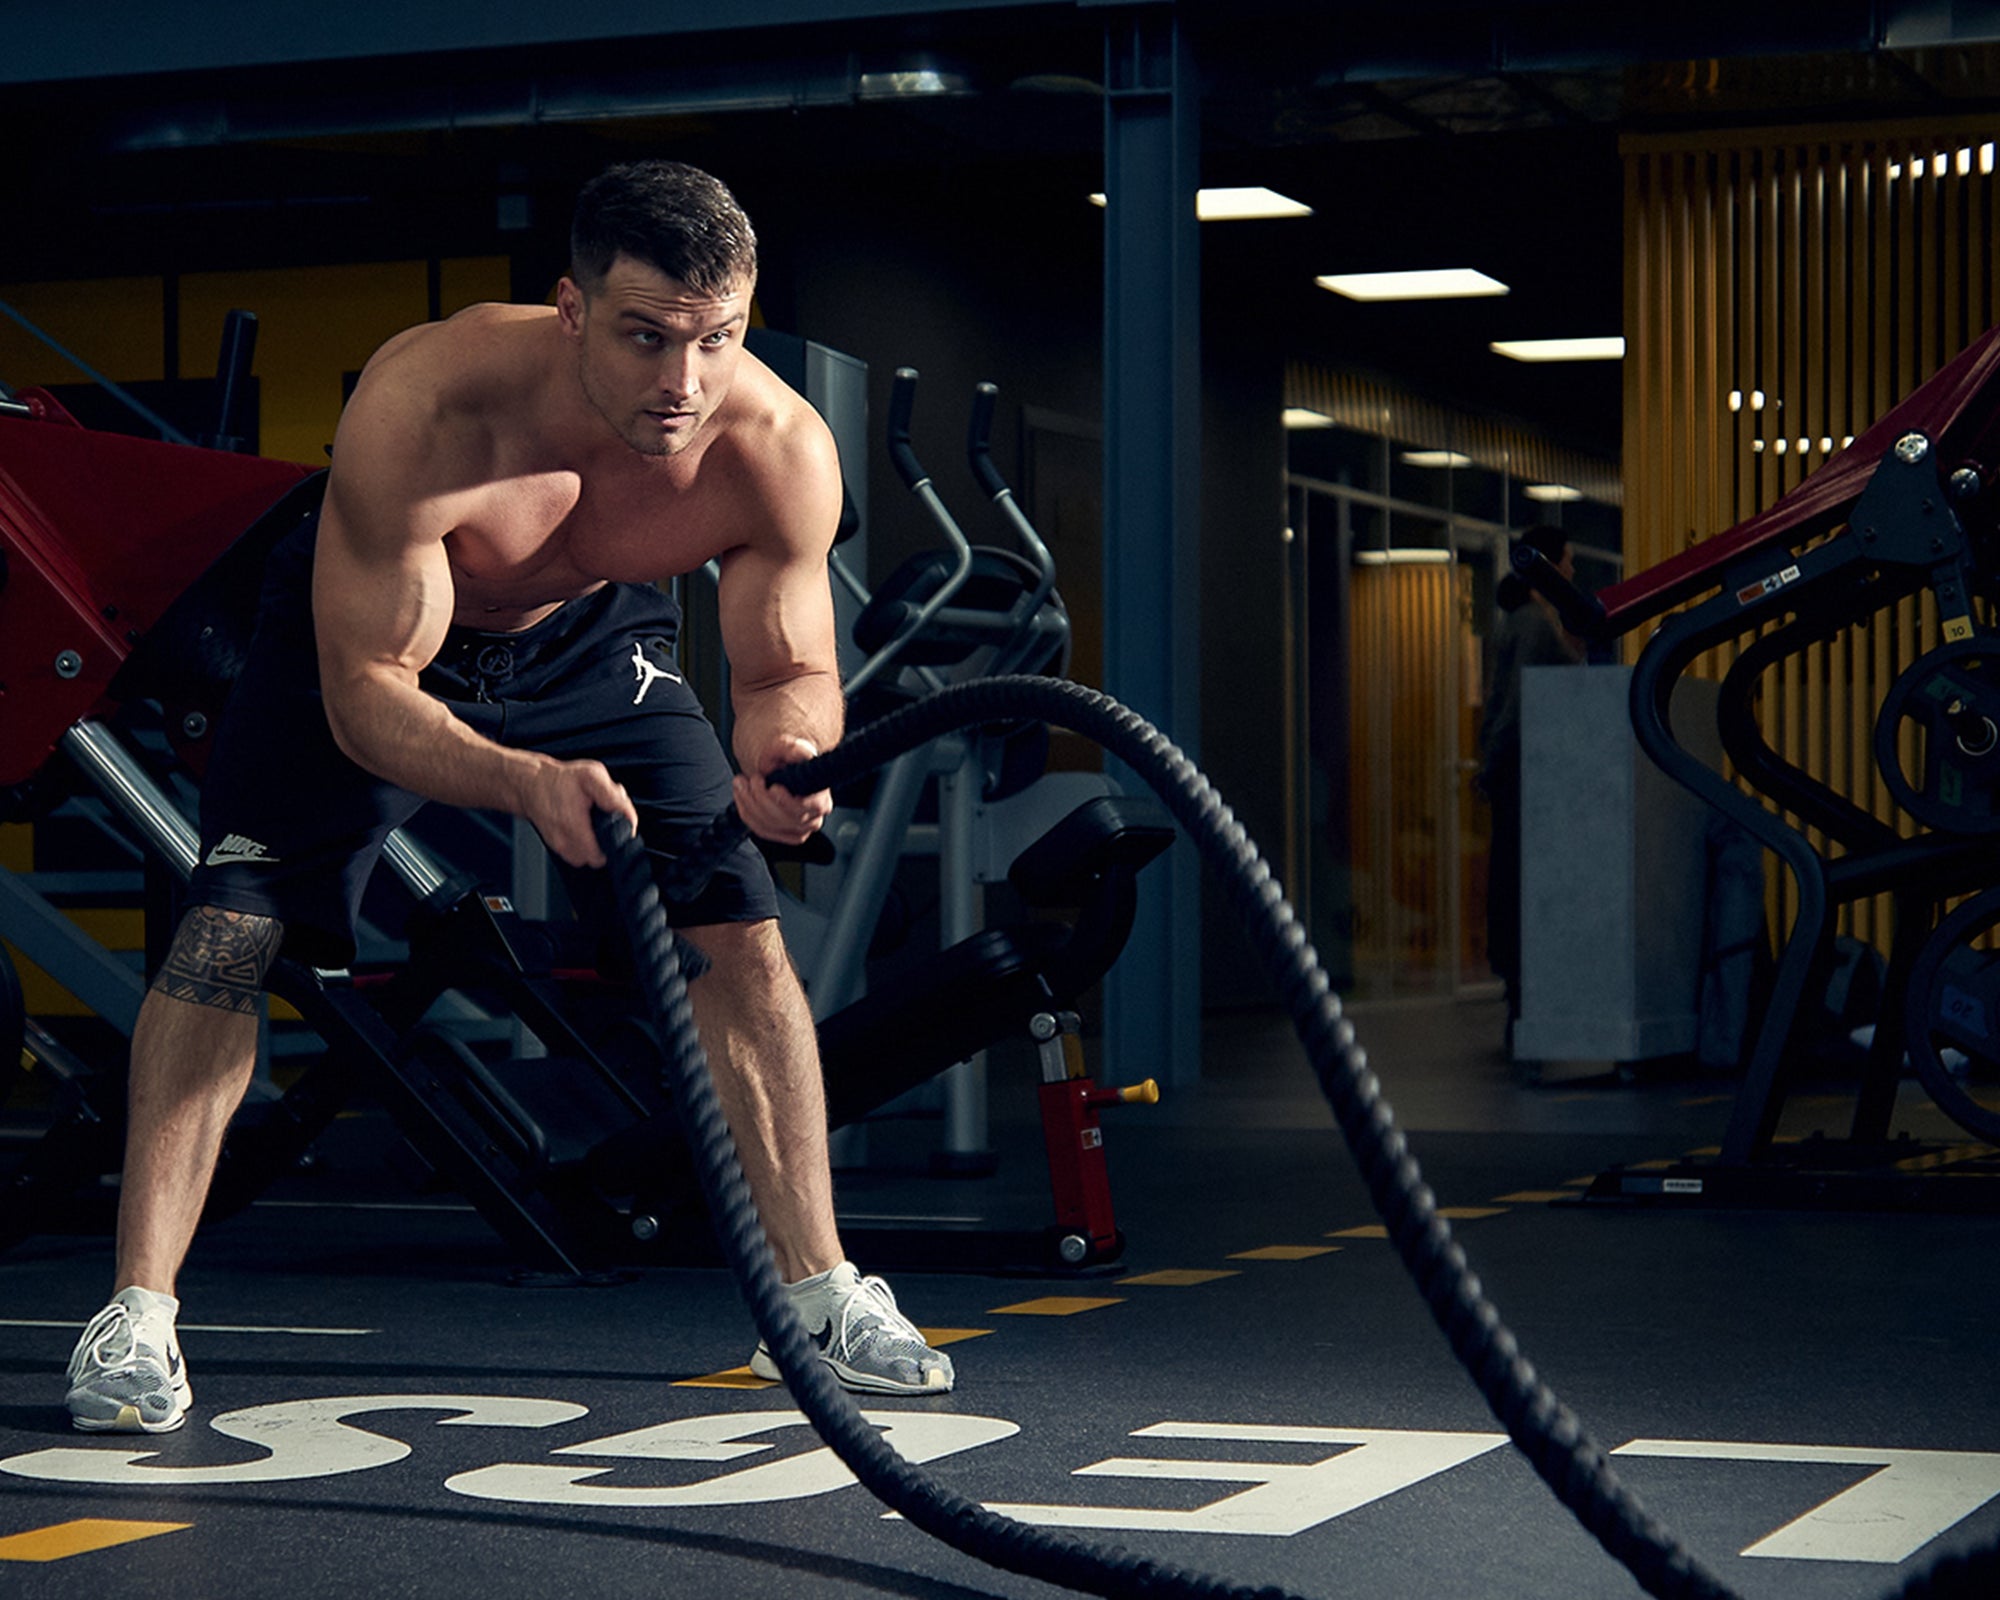 HOW DO YOU USE BATTLE ROPES? POWERGUIDANCE